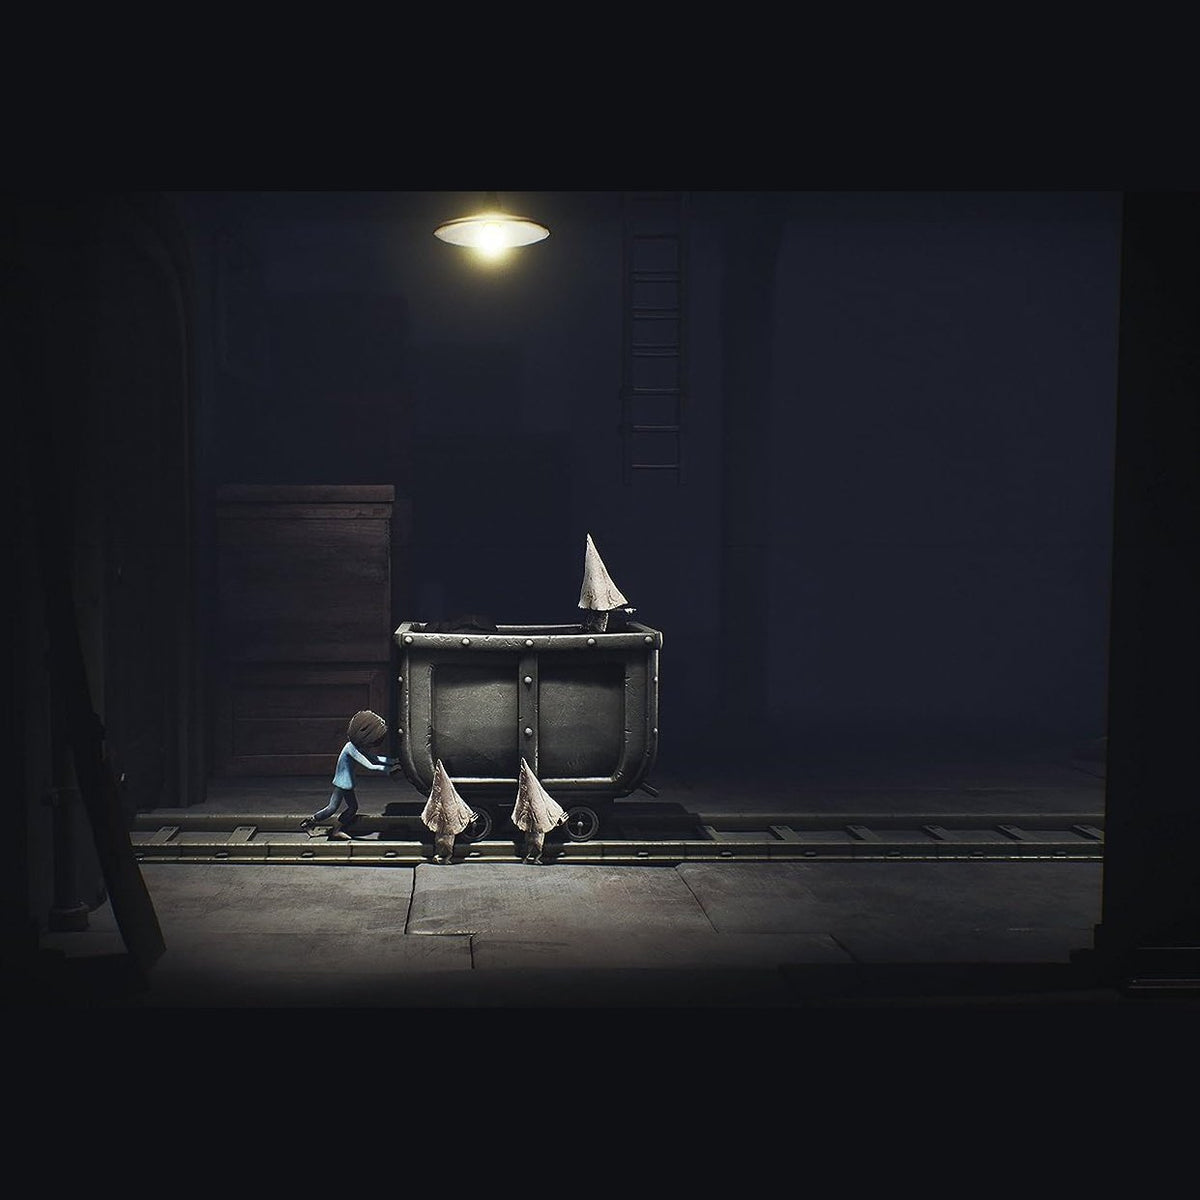 Little Nightmares Complete Edition Xbox One & Xbox Series X